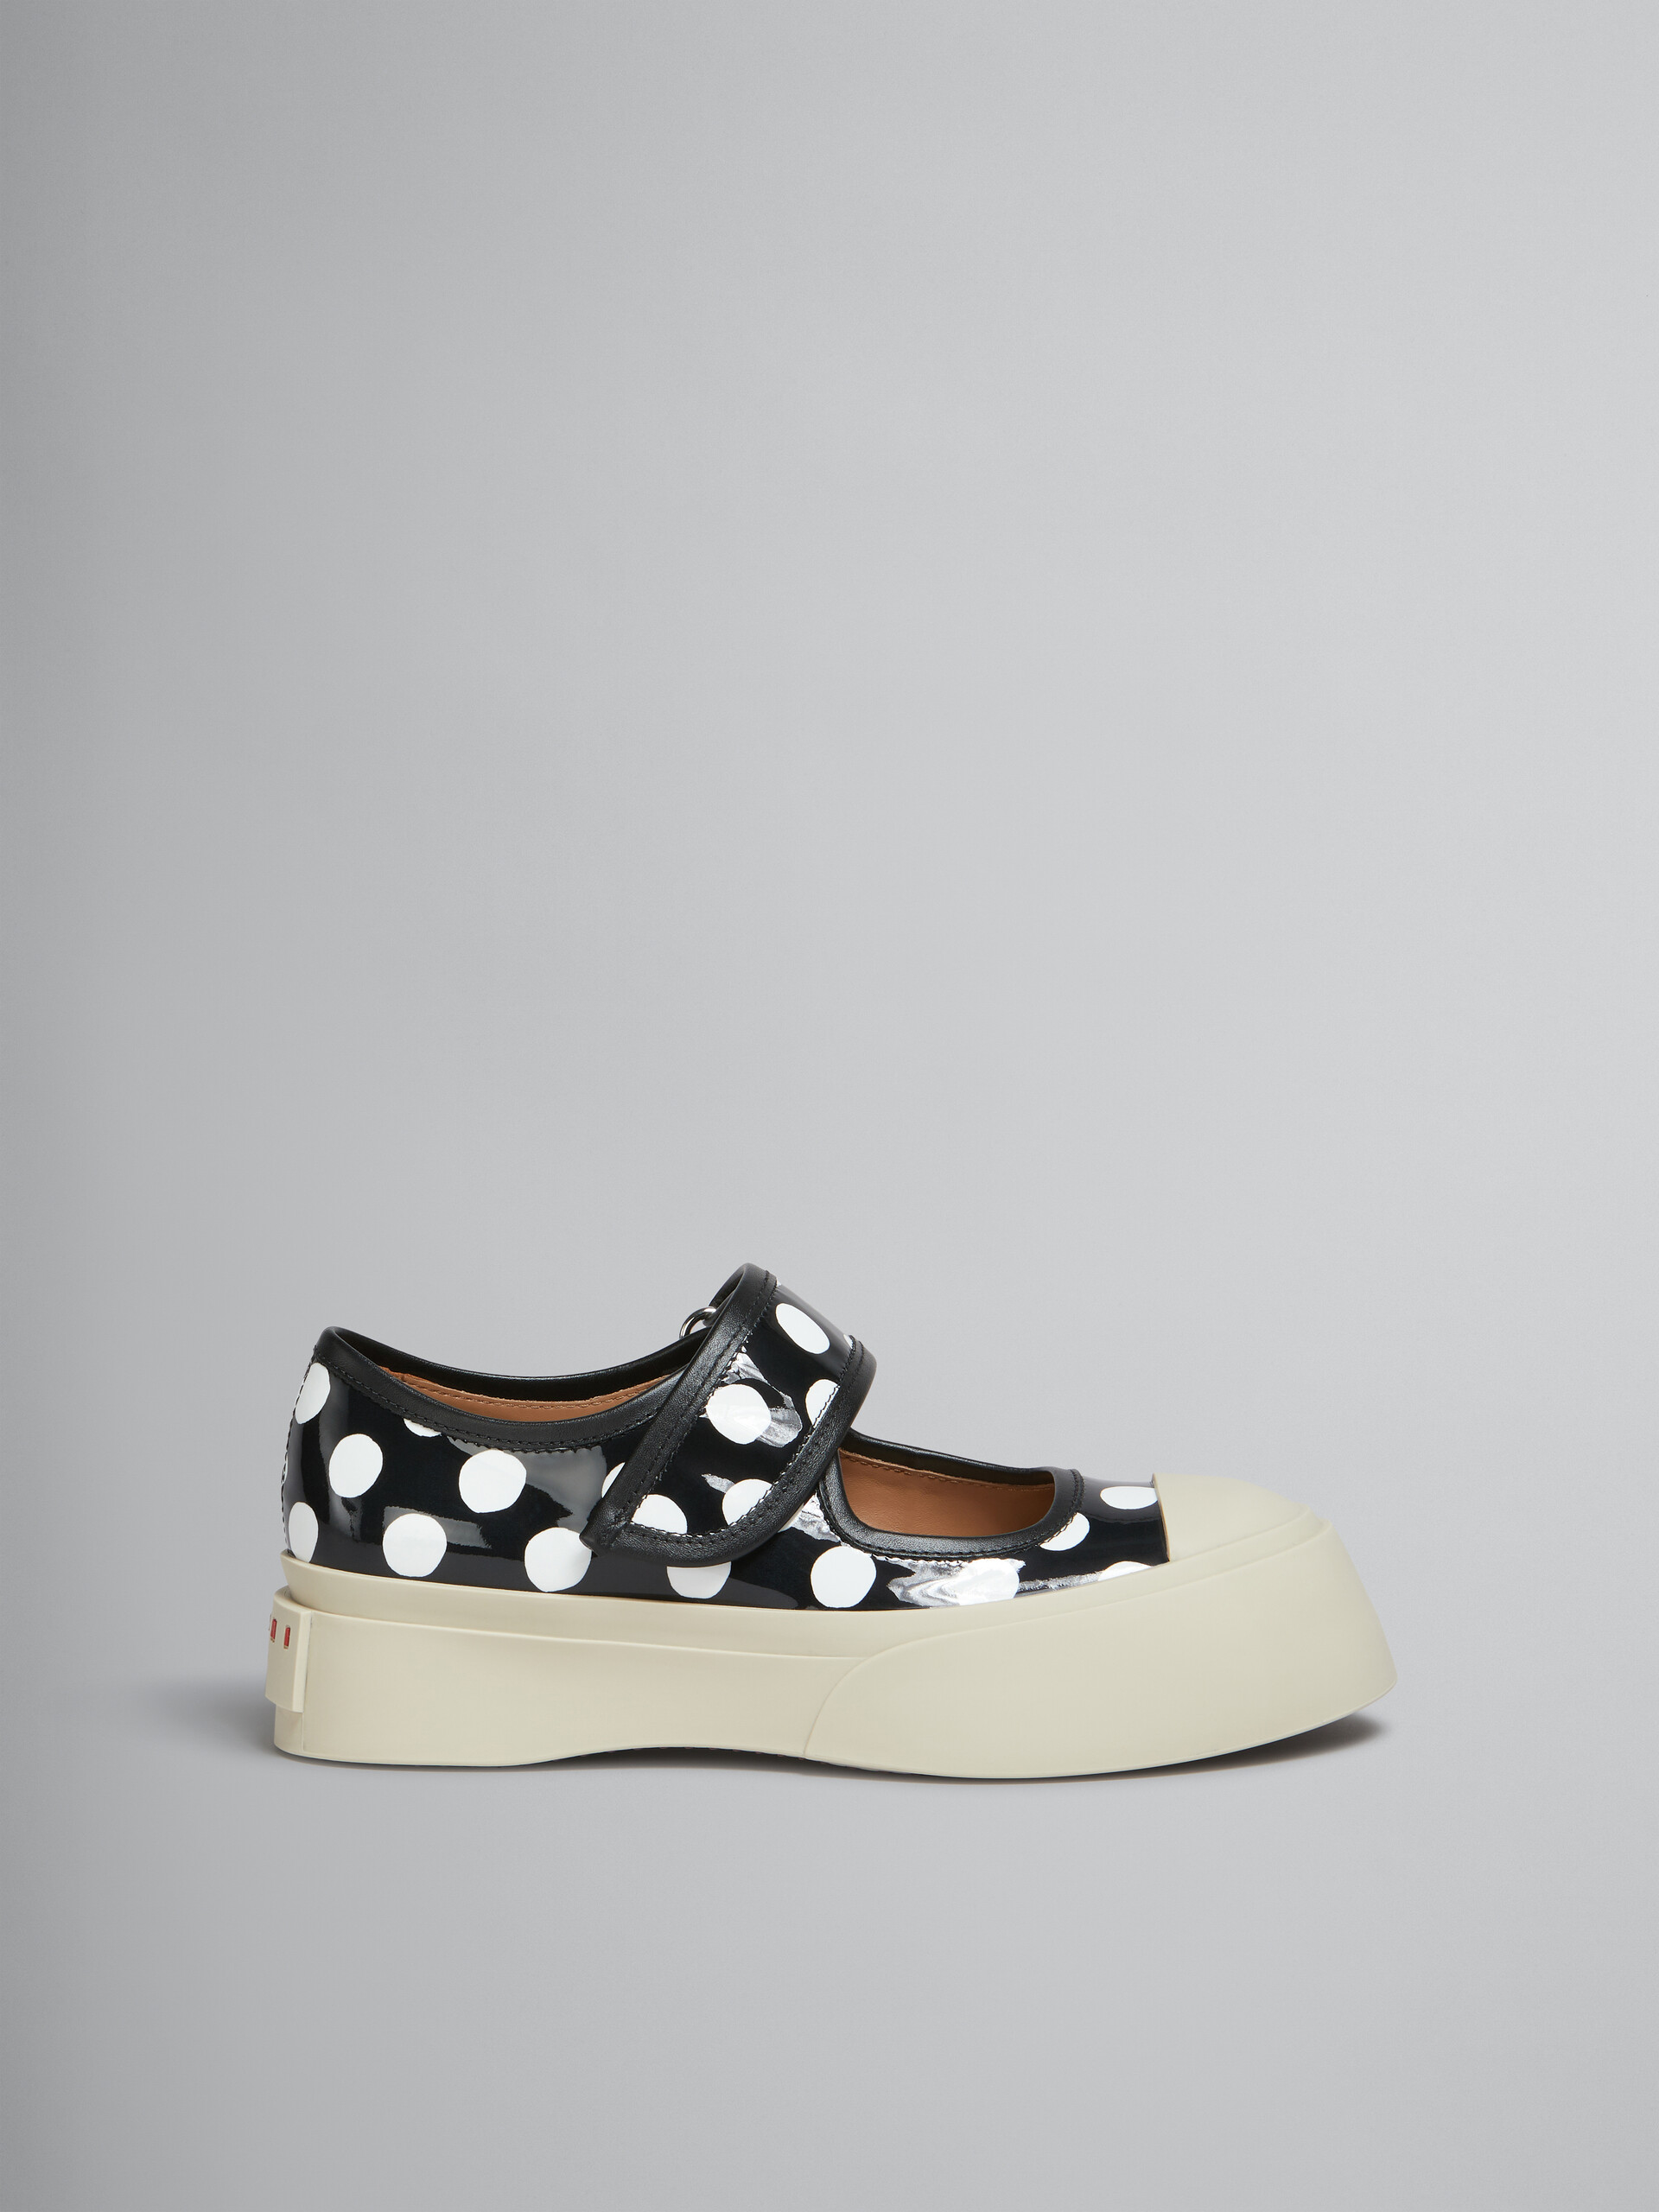 Black and white polka-dot patent leather Pablo Mary Jane sneaker - Sneakers - Image 1